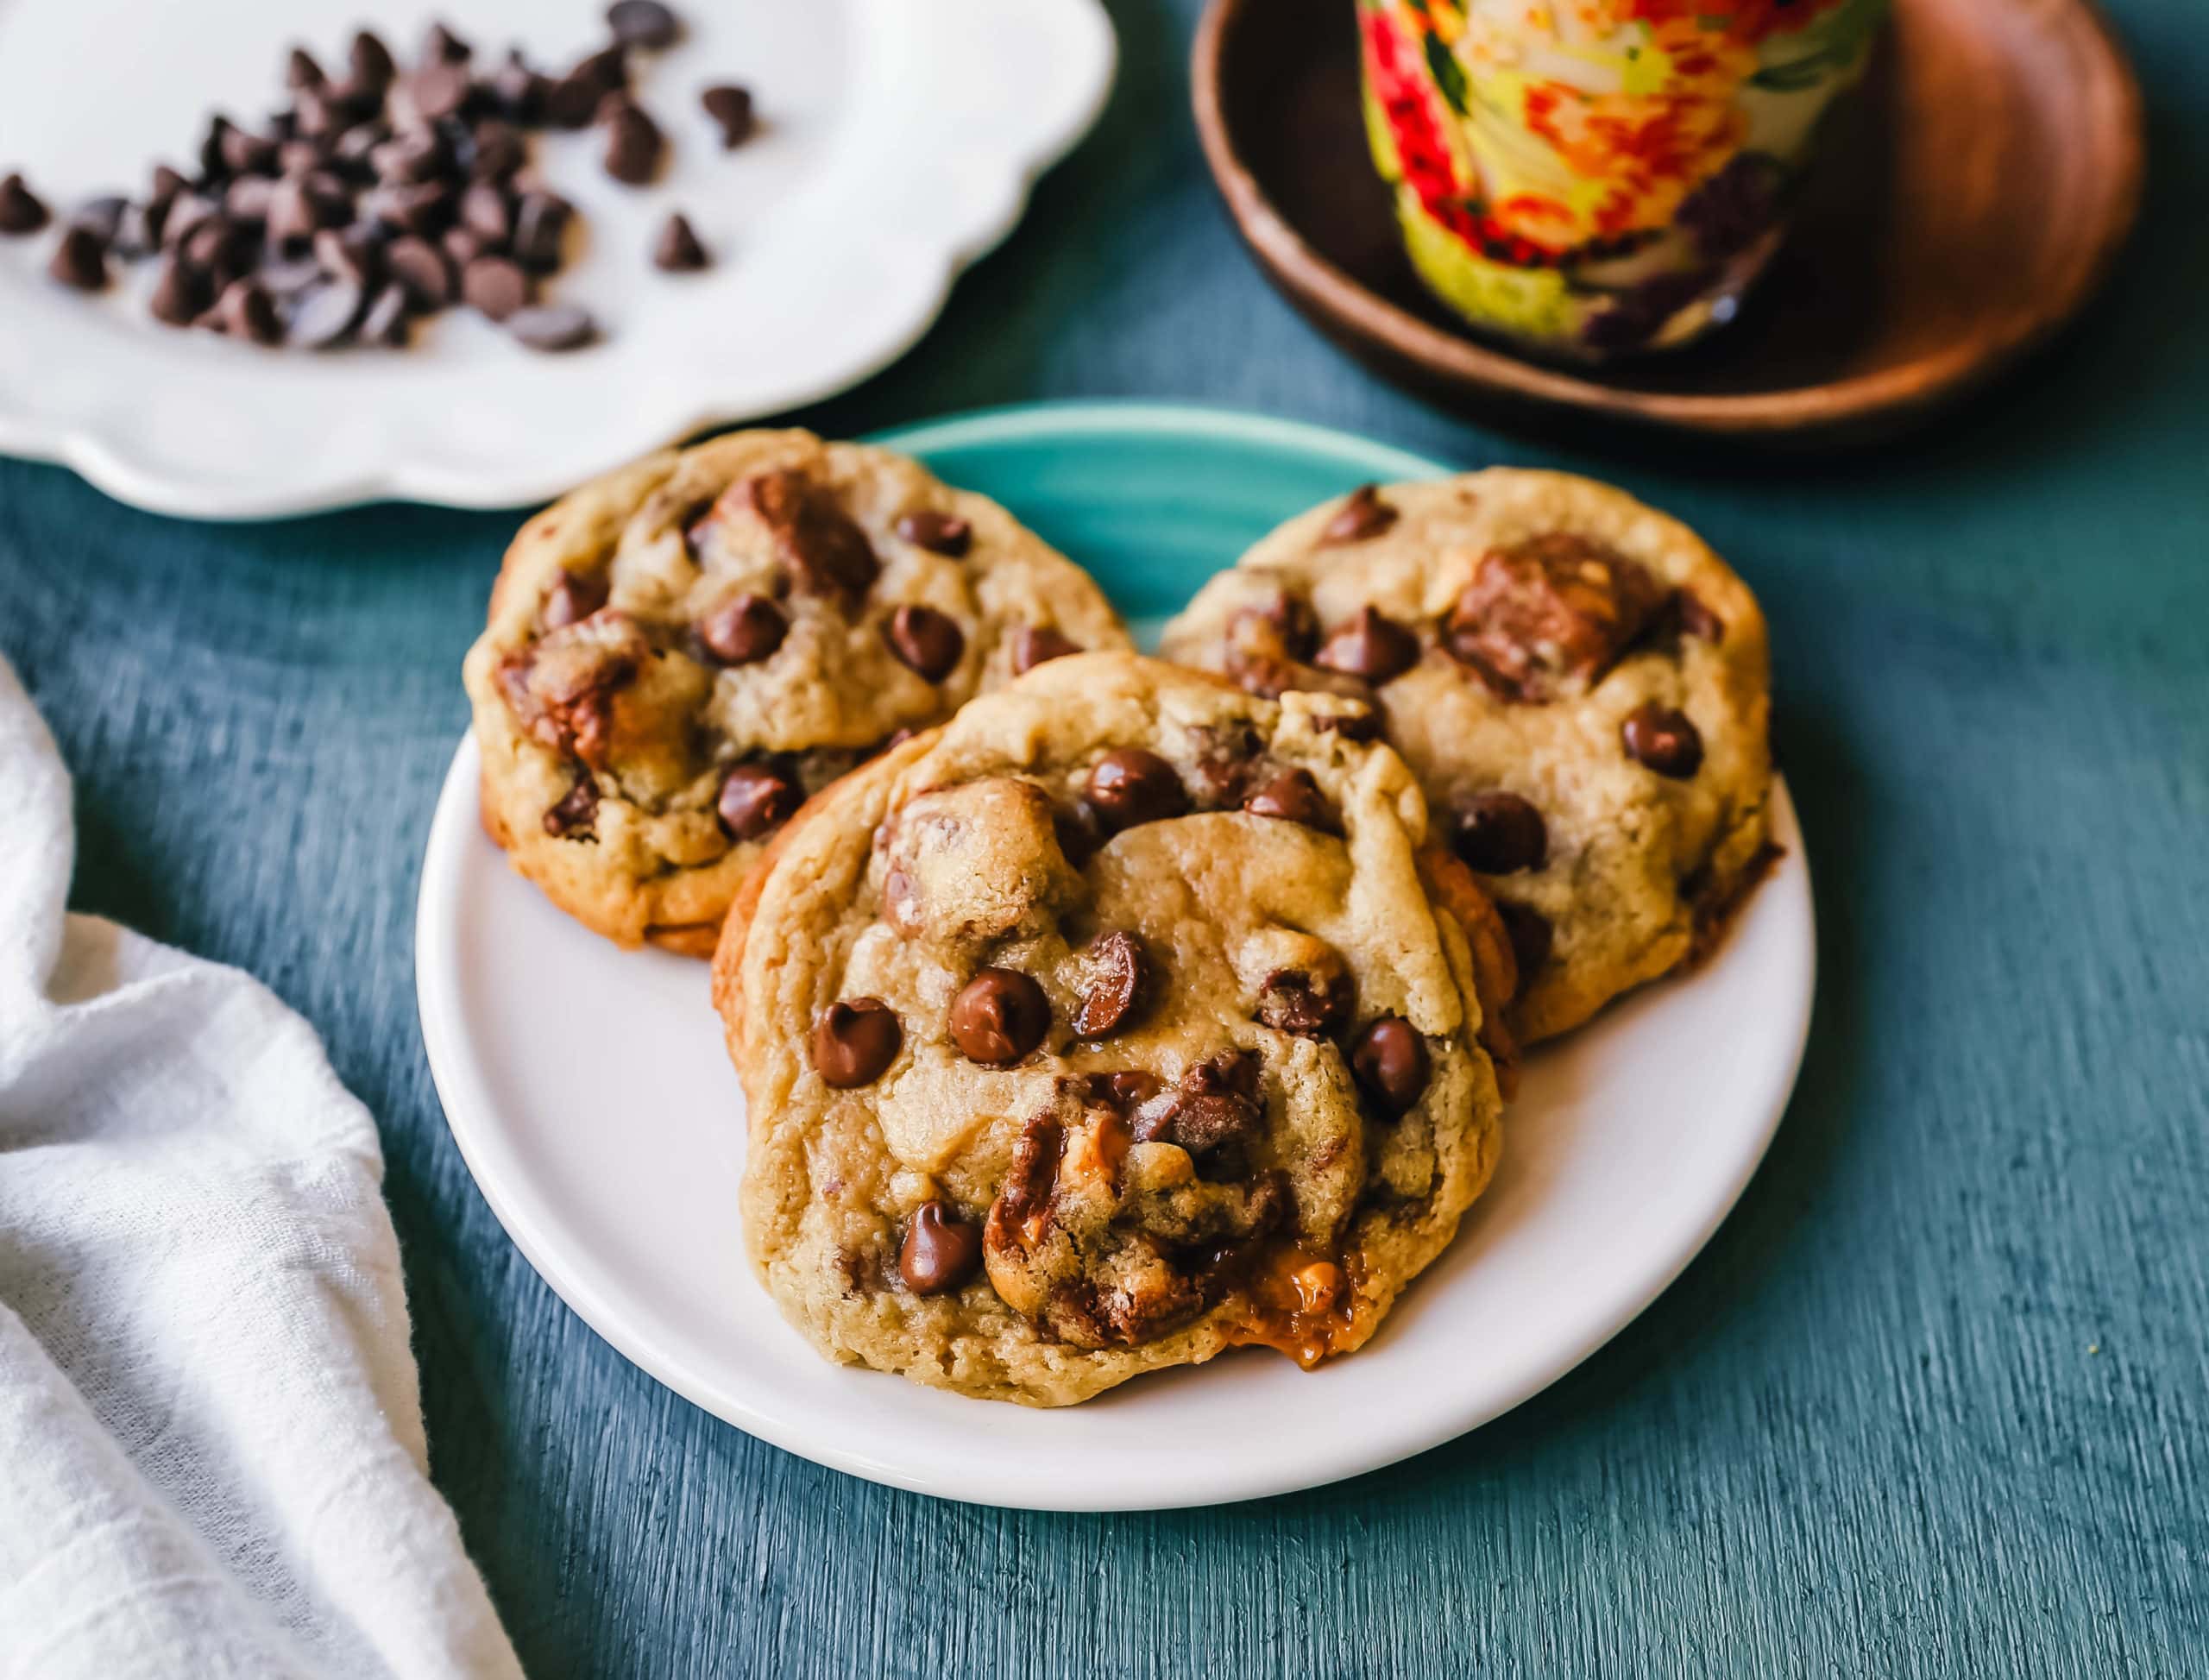 Snickers Chocolate Chip Cookies Soft, chewy chocolate chip cookies with Snickers candy bars baked in them. The perfect chocolate chip Snickers caramel bar cookies! 